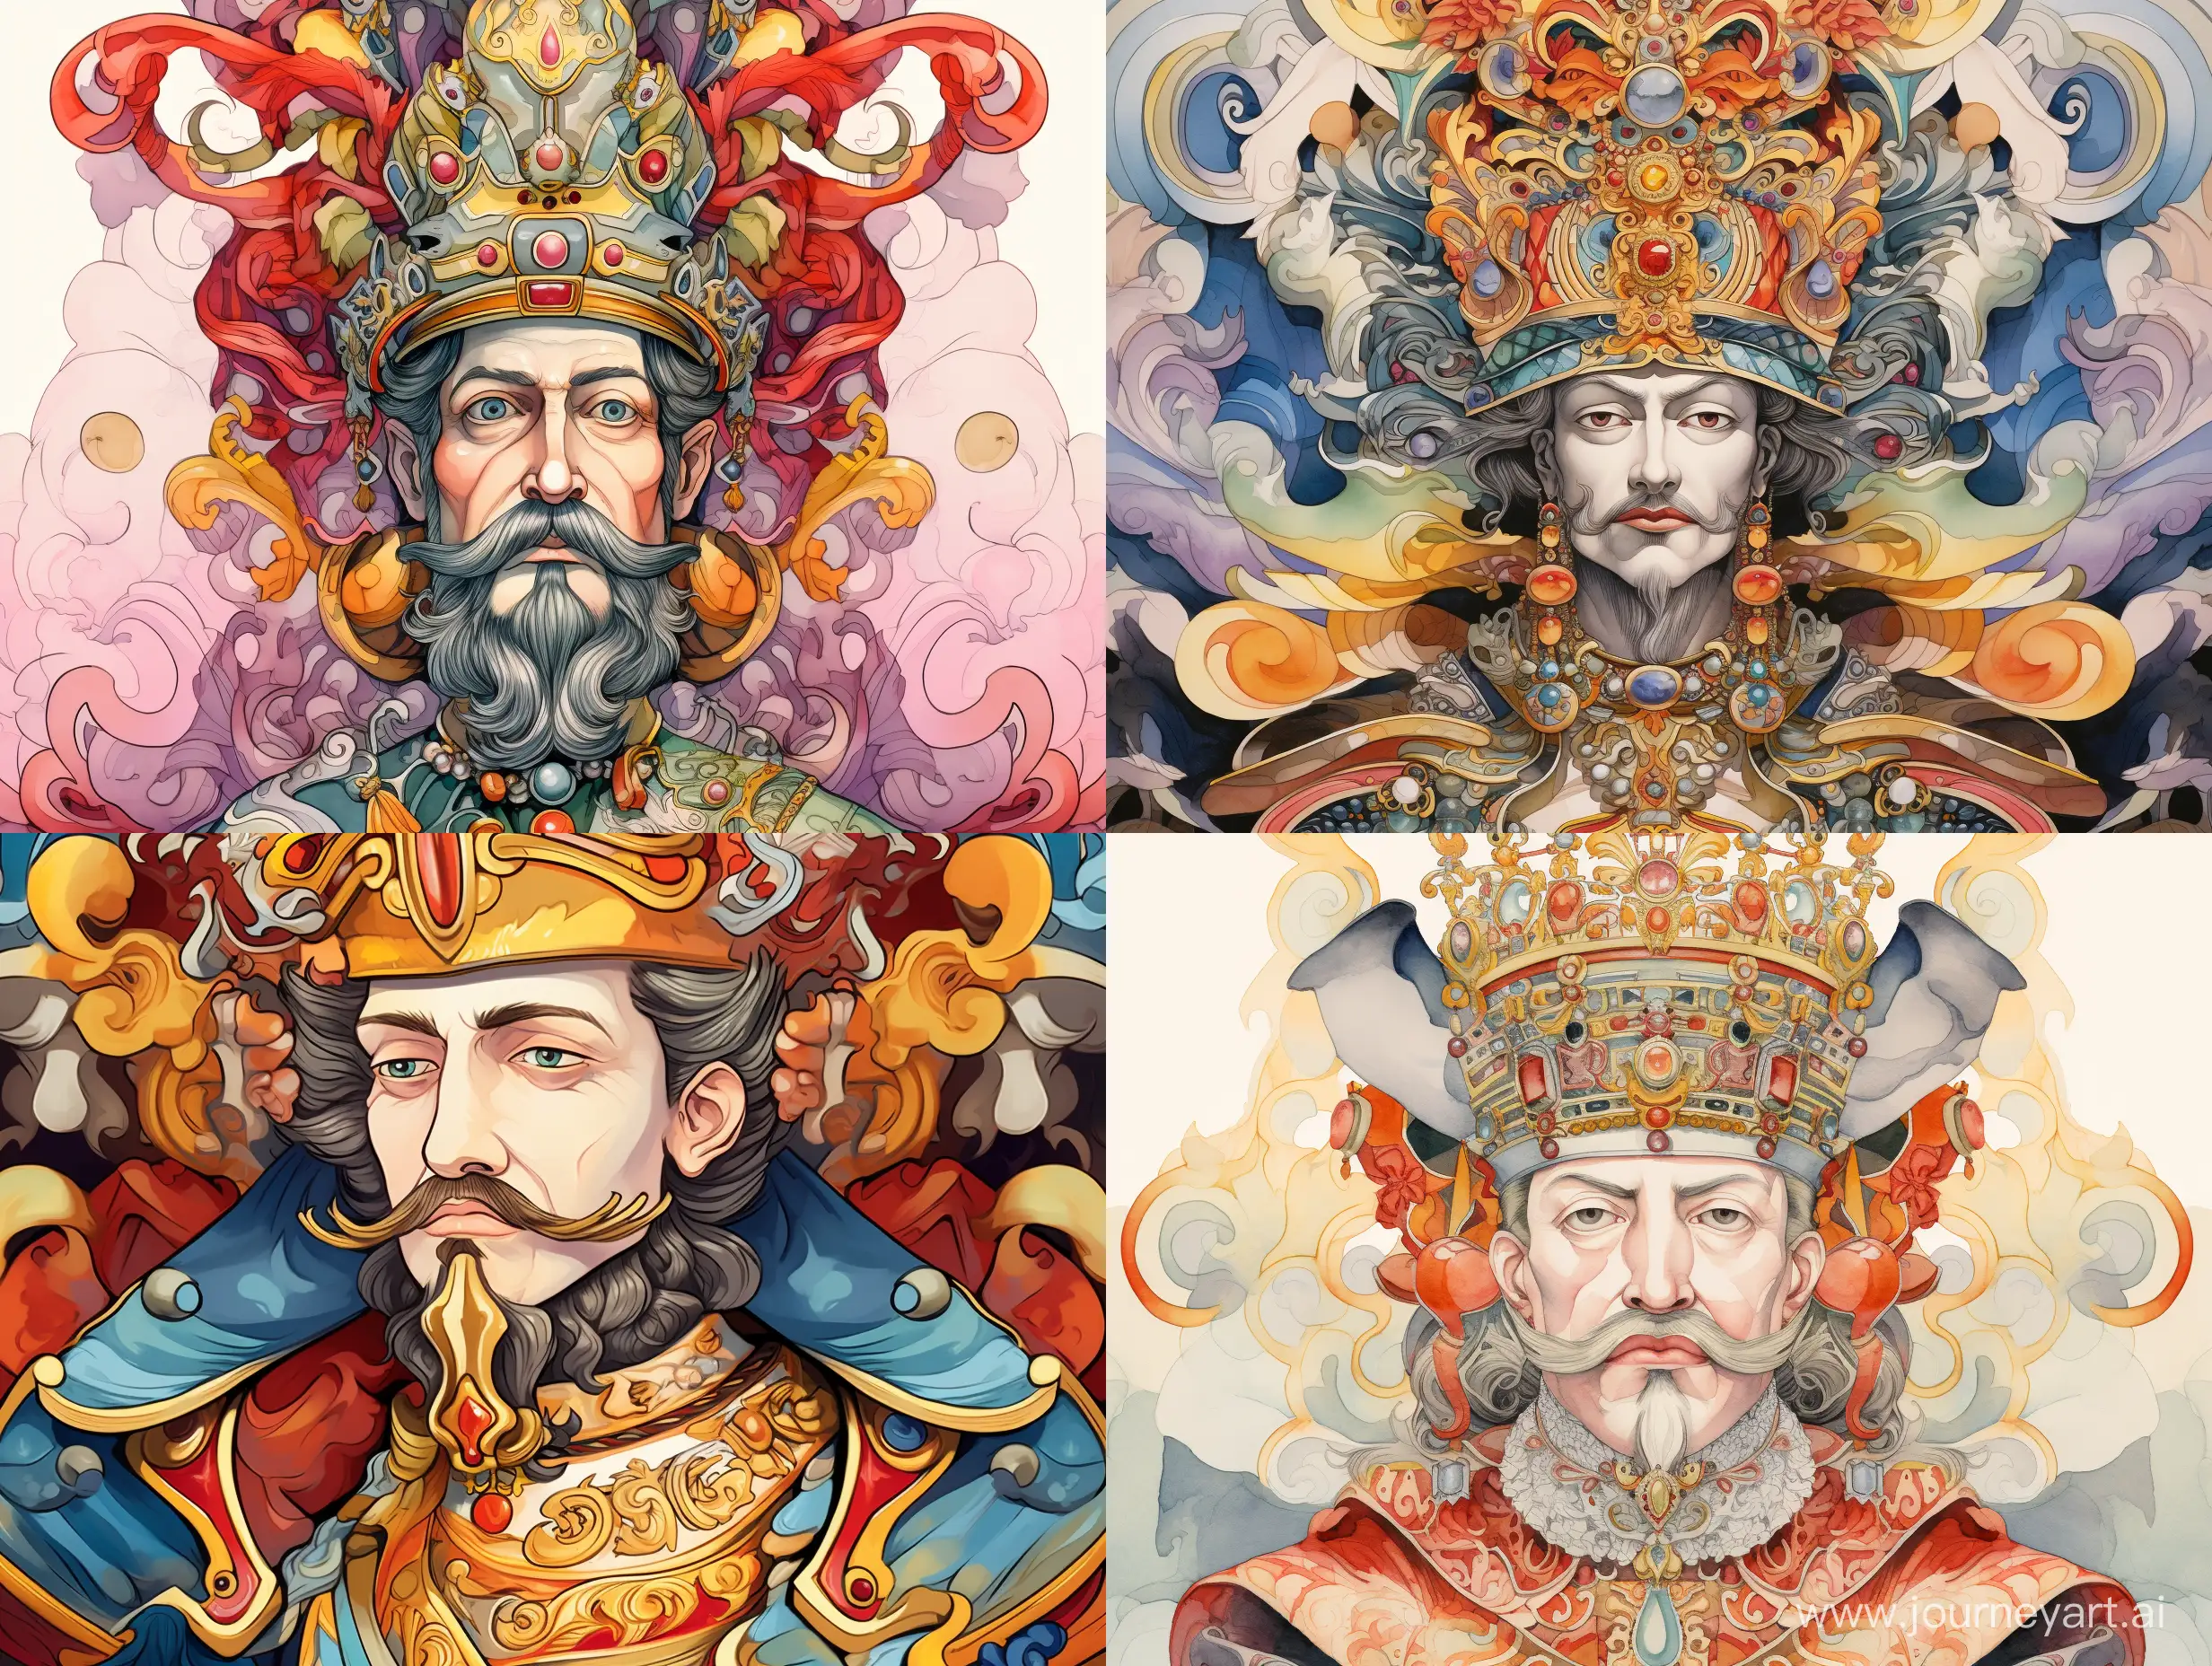 ornamental waist portrait of an ancient rich king, of Austria, reflected vertically, stylized caricature, many details, Victor Ngai style, watercolor, decorative, flat drawing